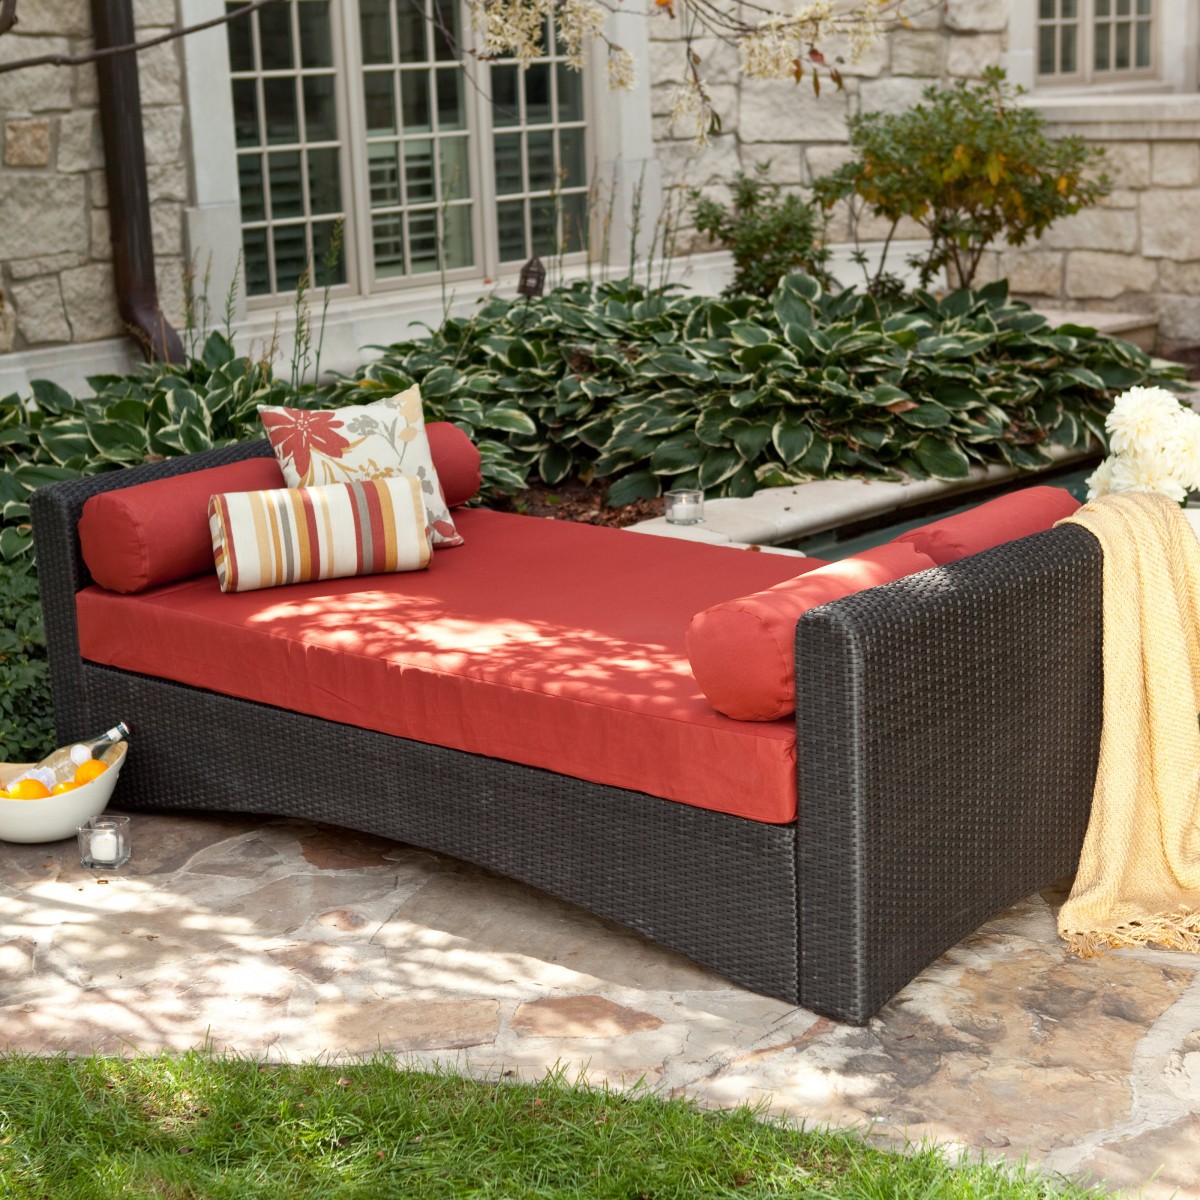 Stylish Outdoor Daybeds For...
</p>
 … <a title=